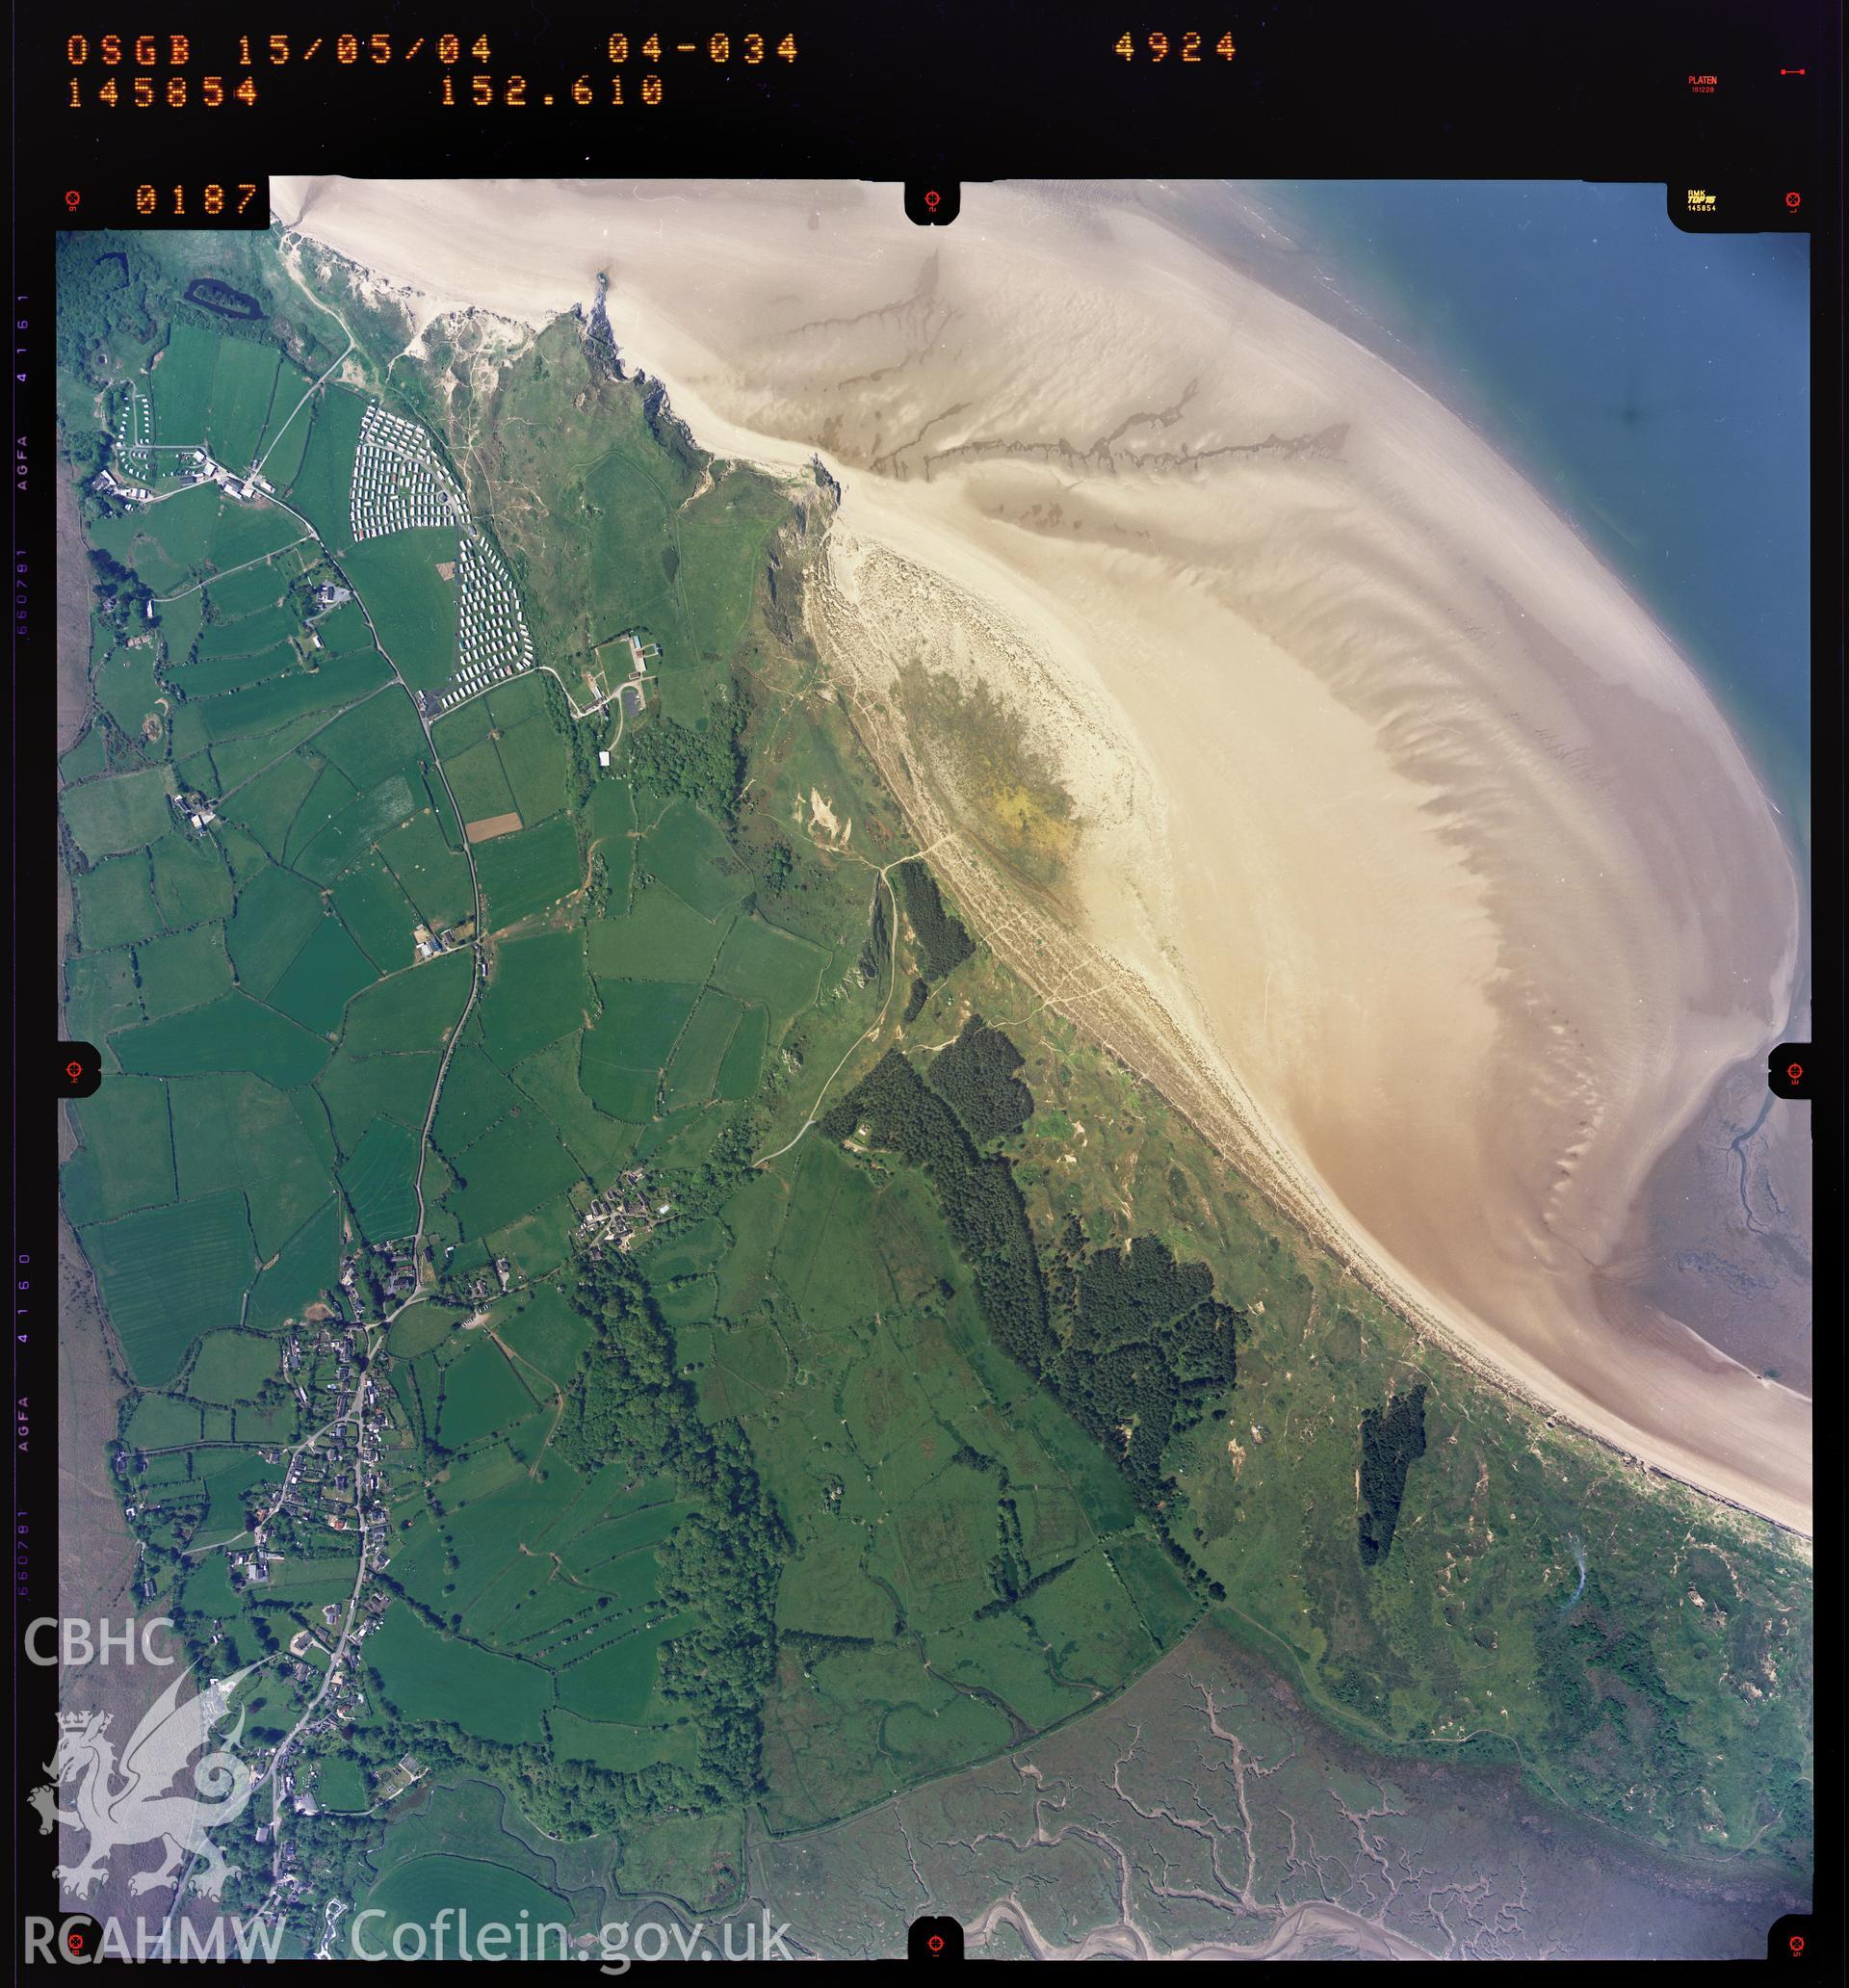 Digitized copy of a colour aerial photograph showing the Llanmadoc area, taken by Ordnance Survey, 2004.